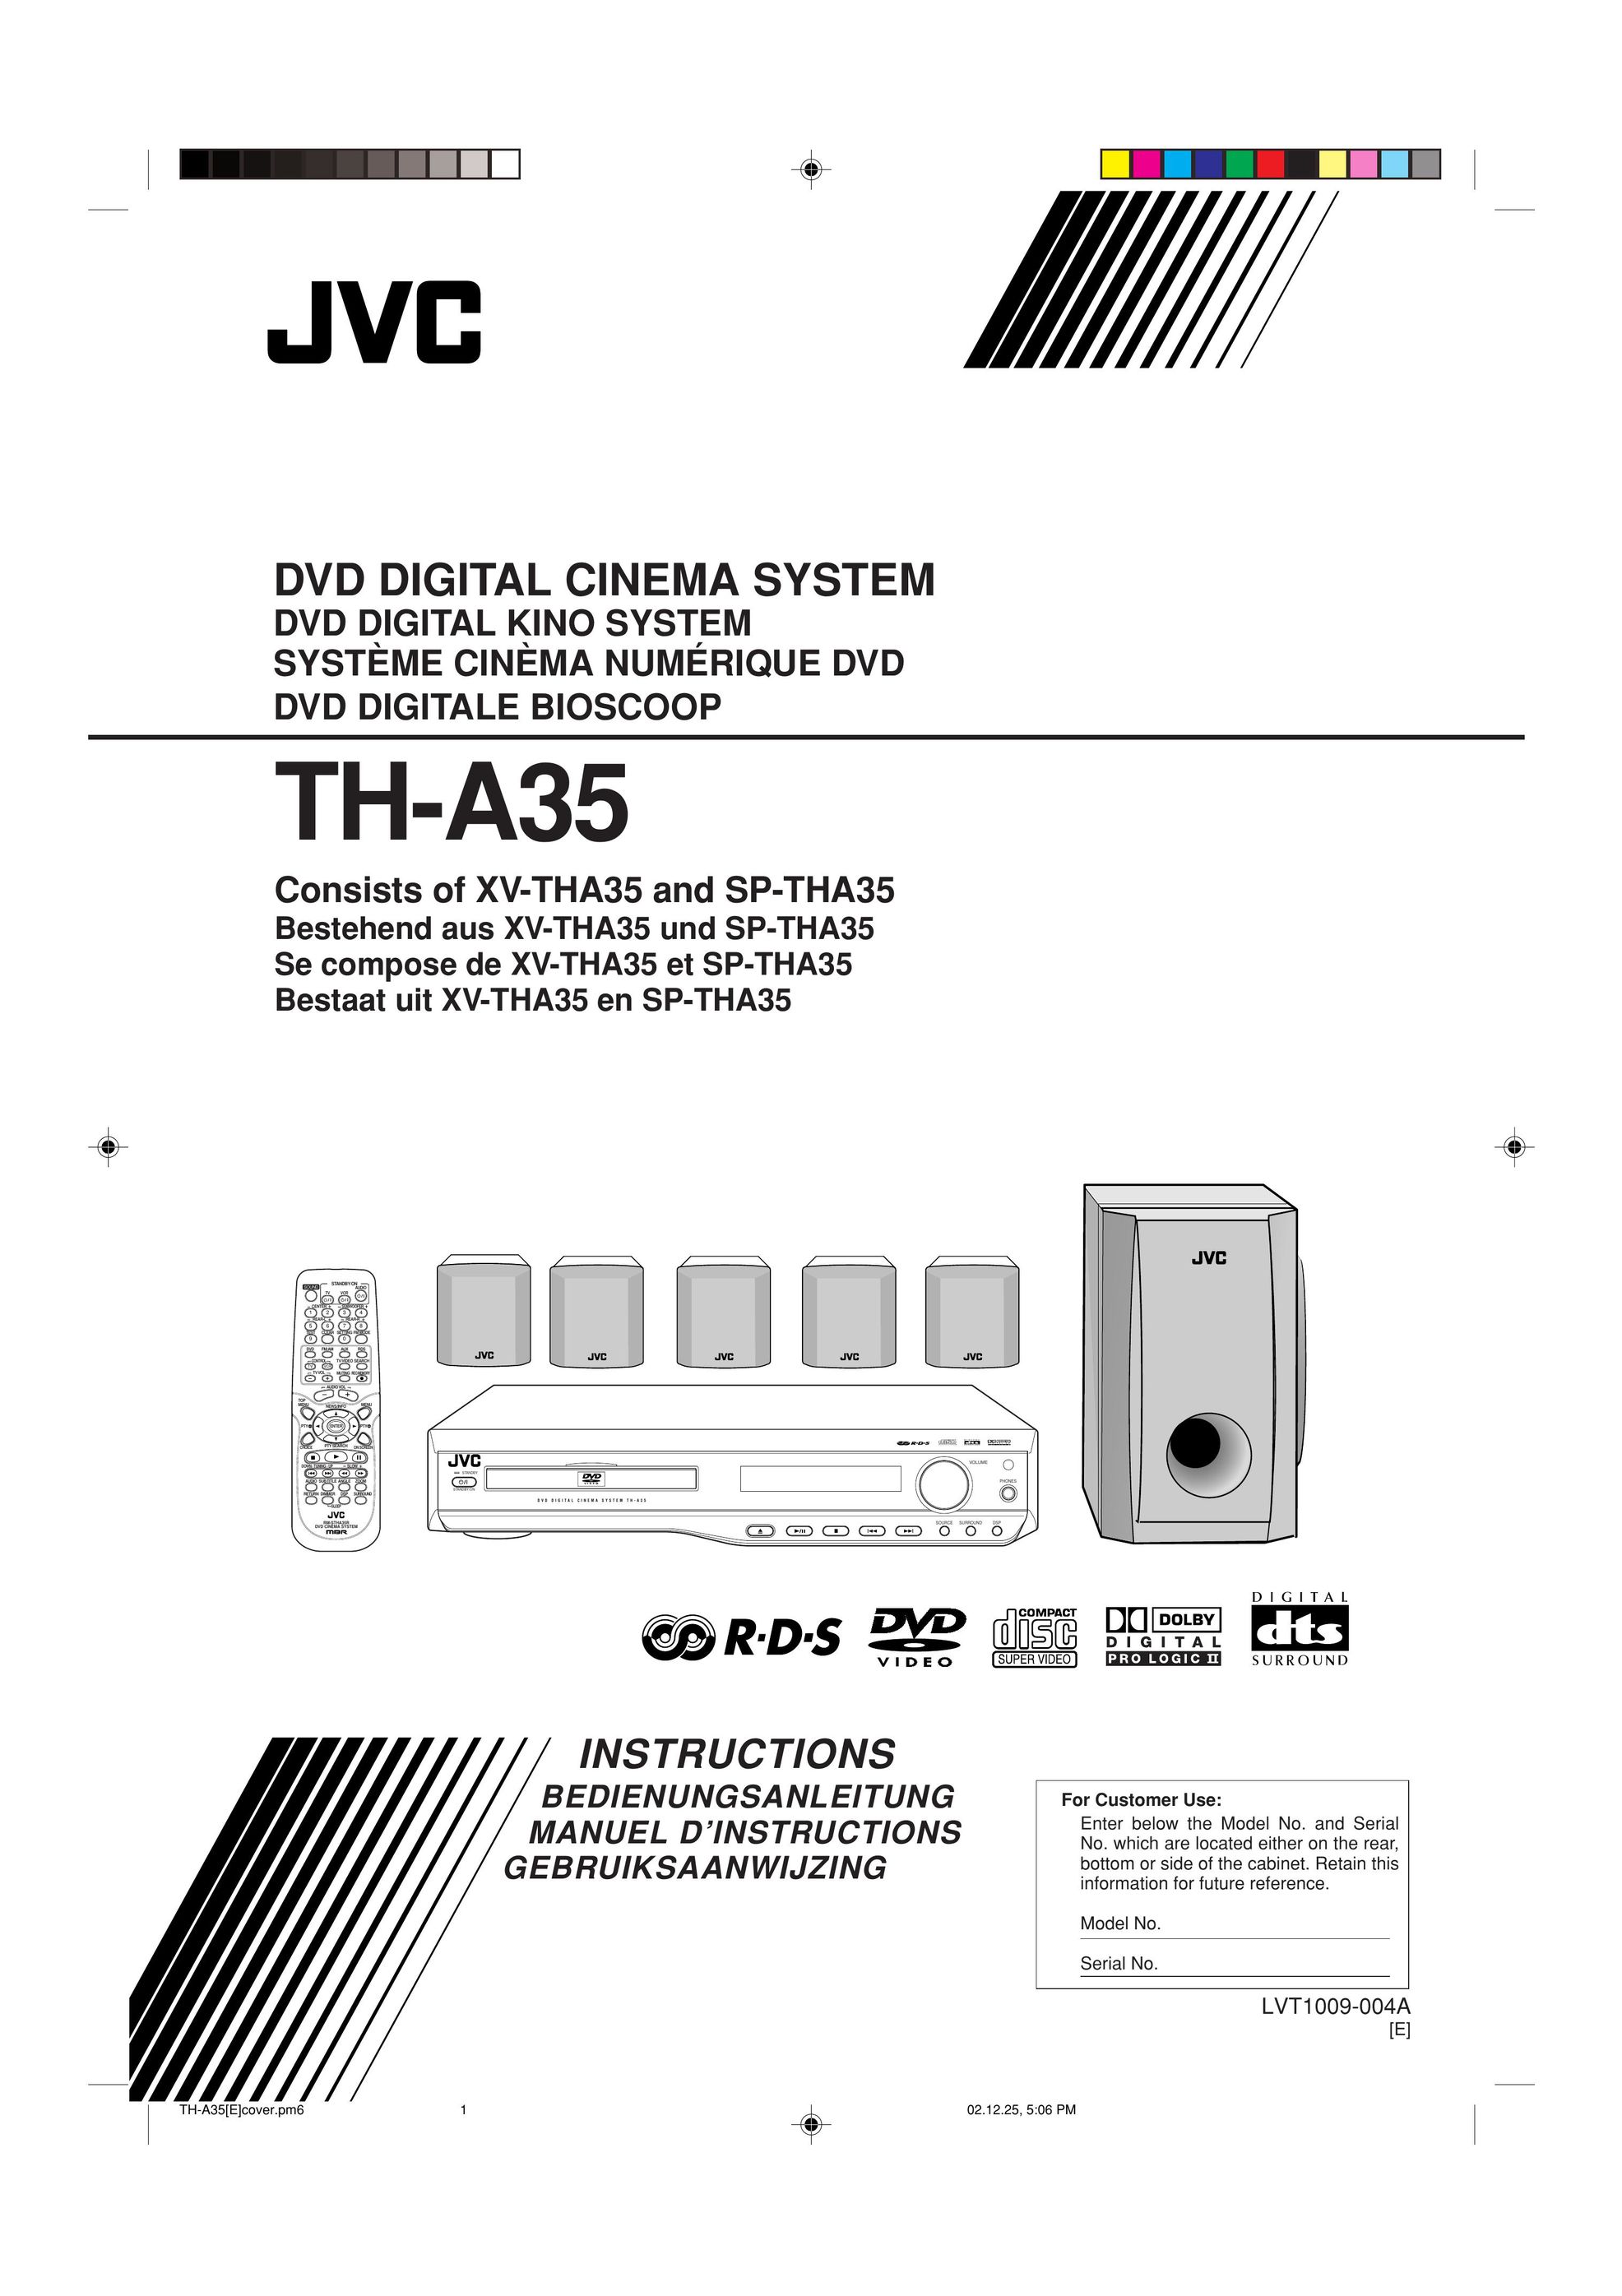 Lennox Hearth TH-A35 Home Theater System User Manual